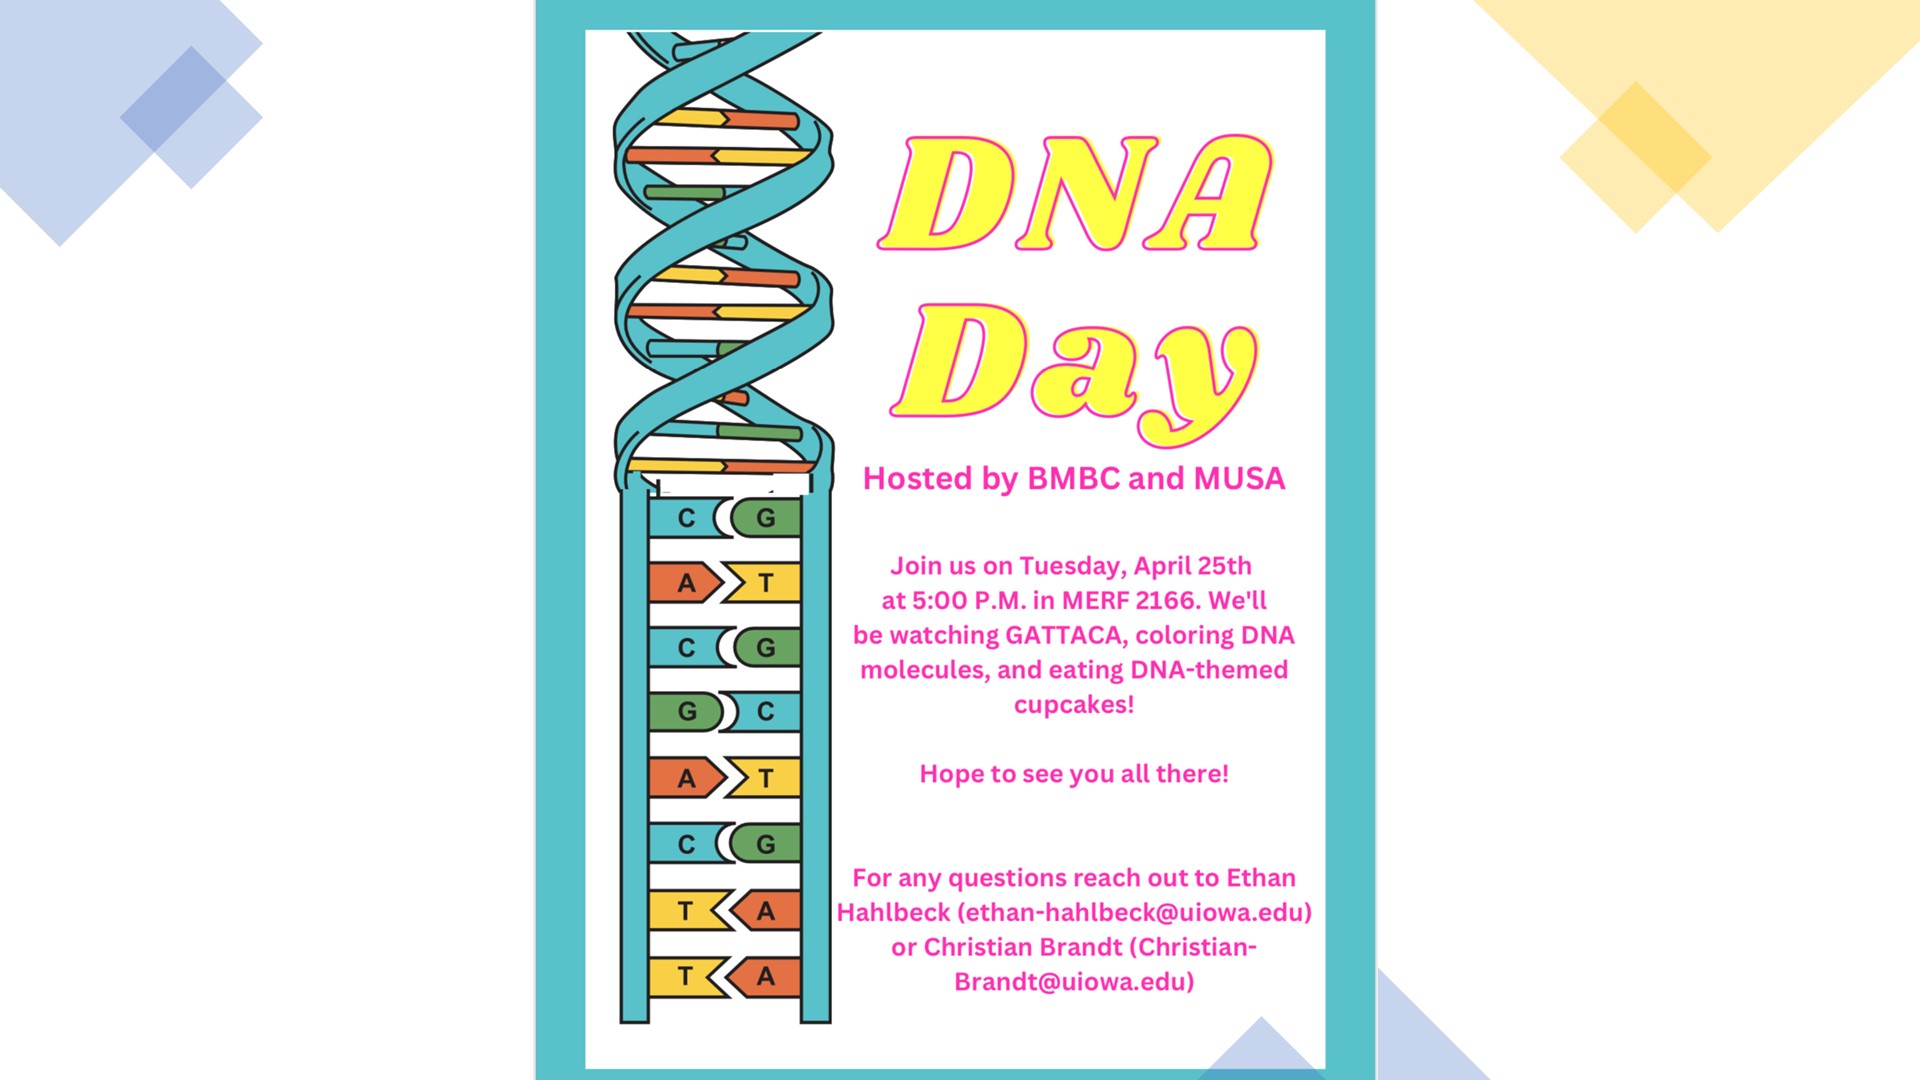 DNA Day April 25th event 2166 MERF 